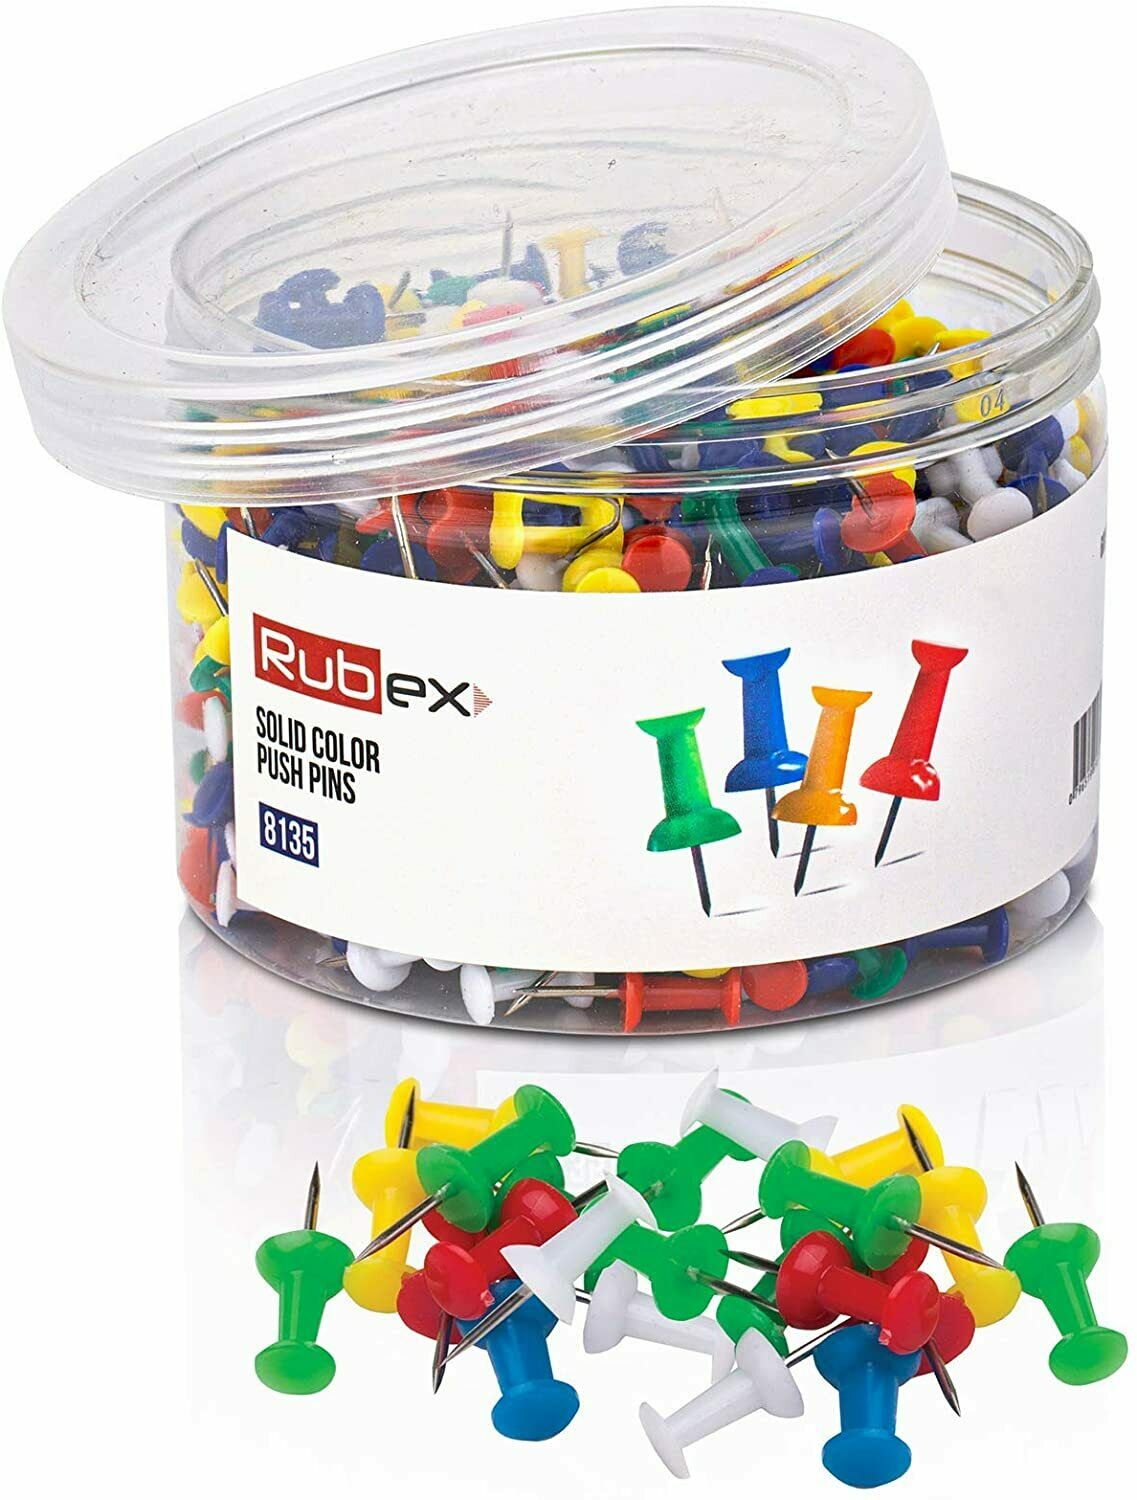 Rubex Push Pins Colorful Push Pins Assorted Multi Colored Plastic Head 600 Count